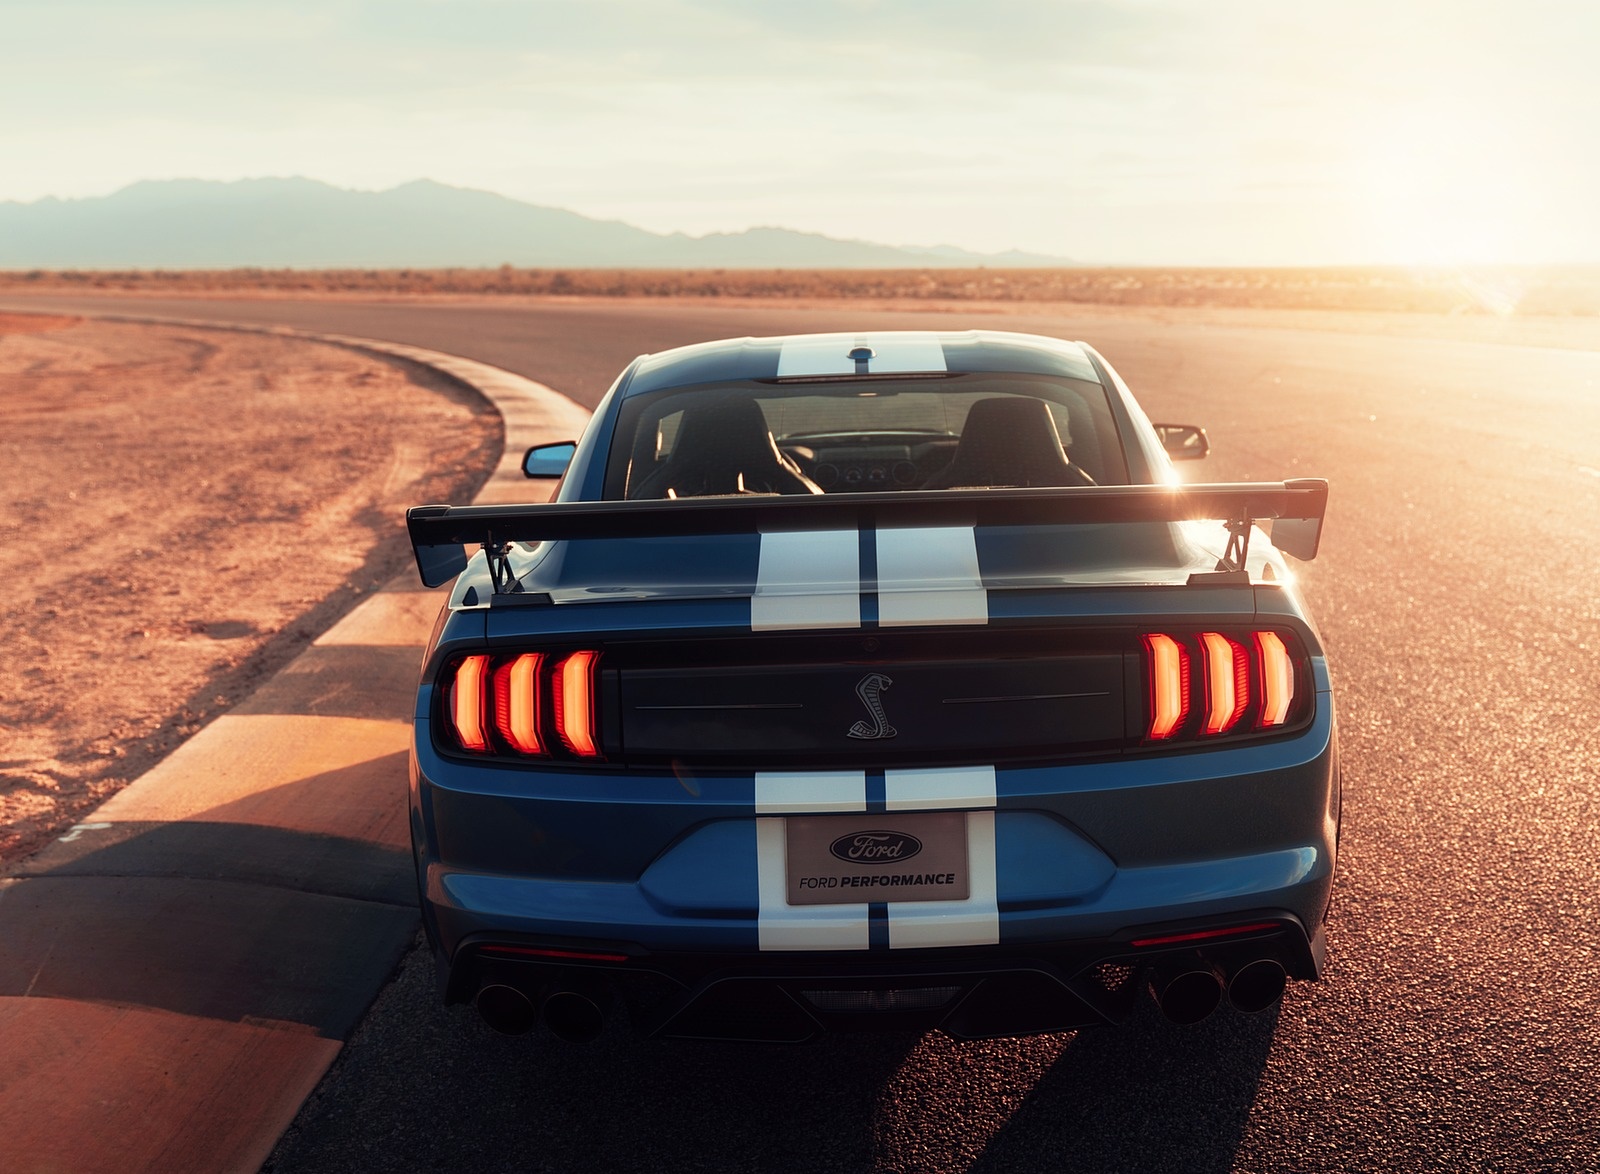 2020 Ford Mustang Shelby GT500 Rear Wallpapers #91 of 115